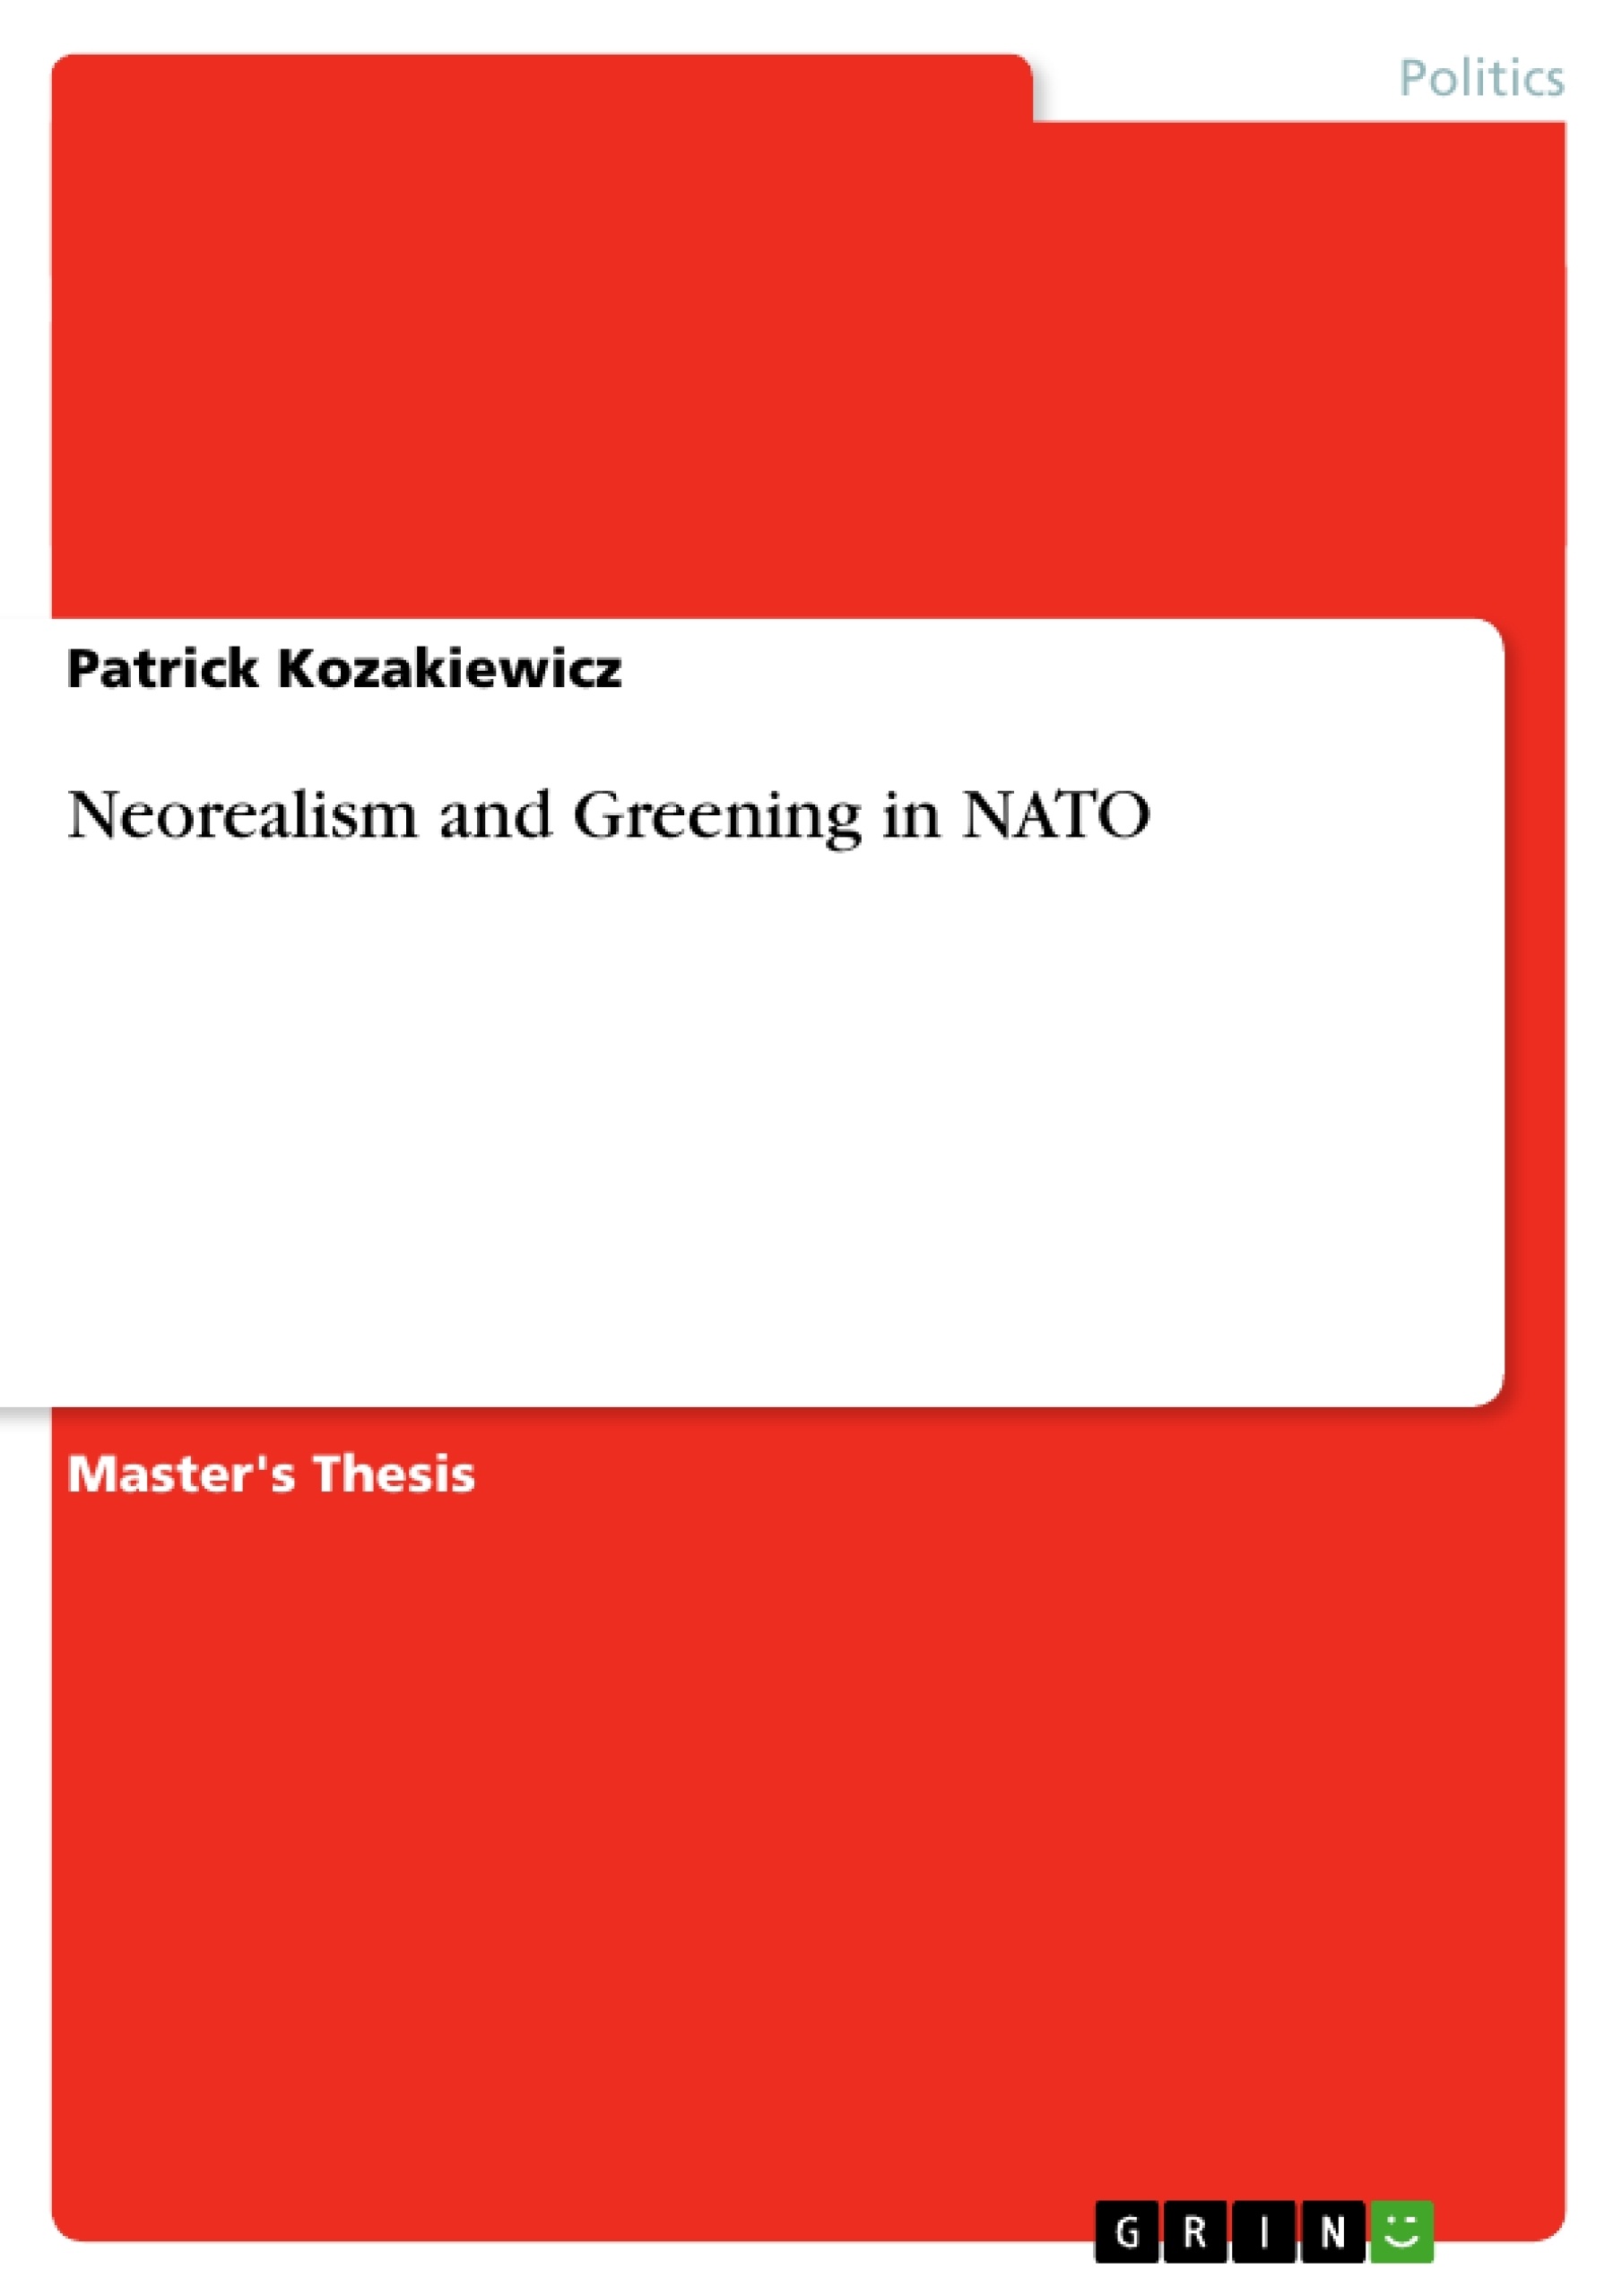 Título: Neorealism and Greening in NATO